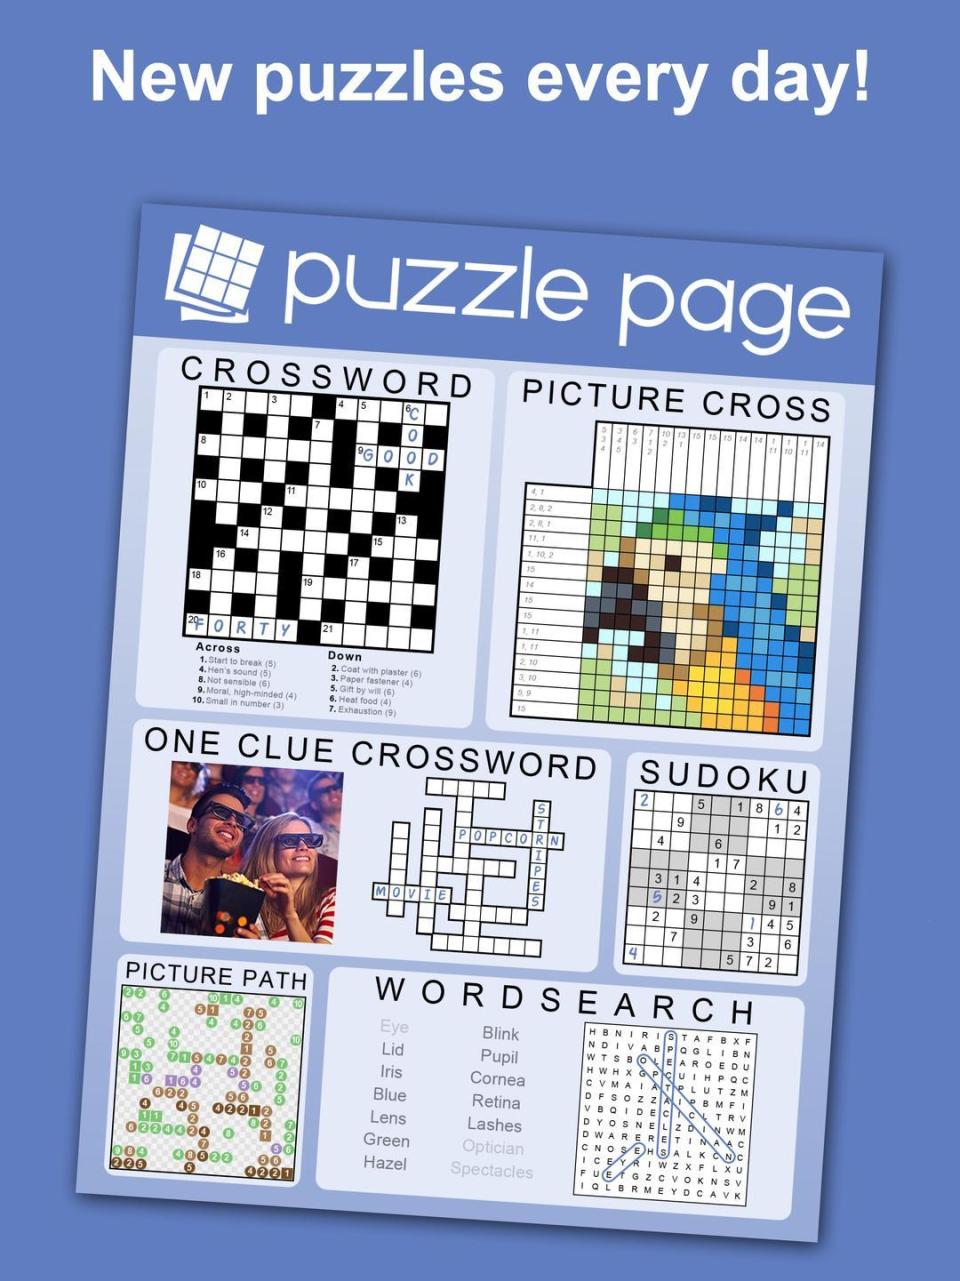 Beloved word and puzzle games, and more, are in one app for your smartphone or tablet. AppyNation’s Puzzle Page offers an extensive collection of free-to-play content.